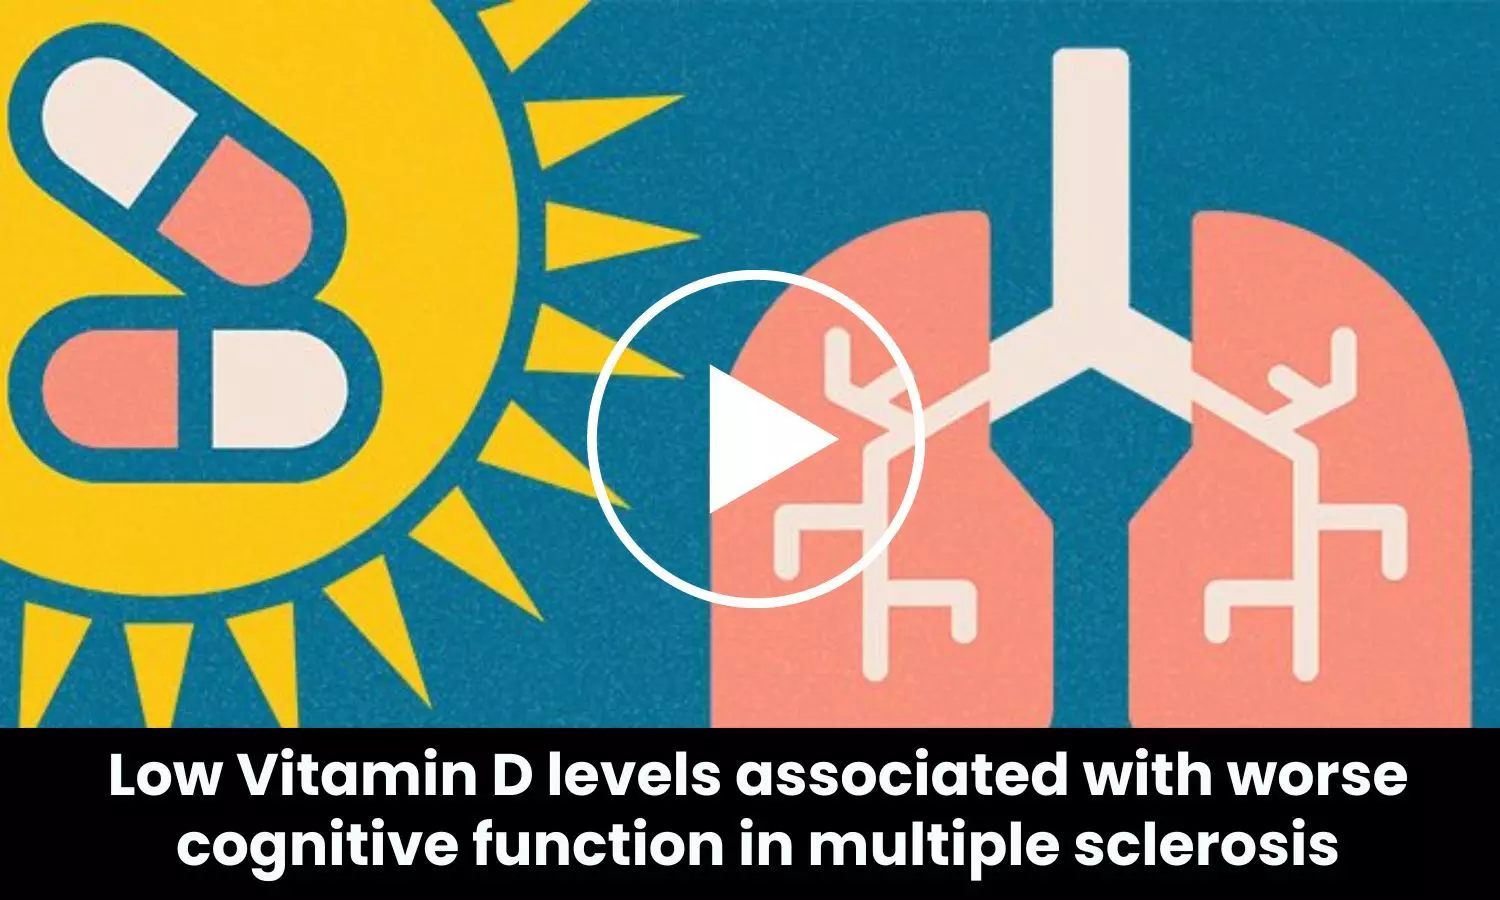 Low Vitamin D levels associated with worse cognitive function in multiple sclerosis